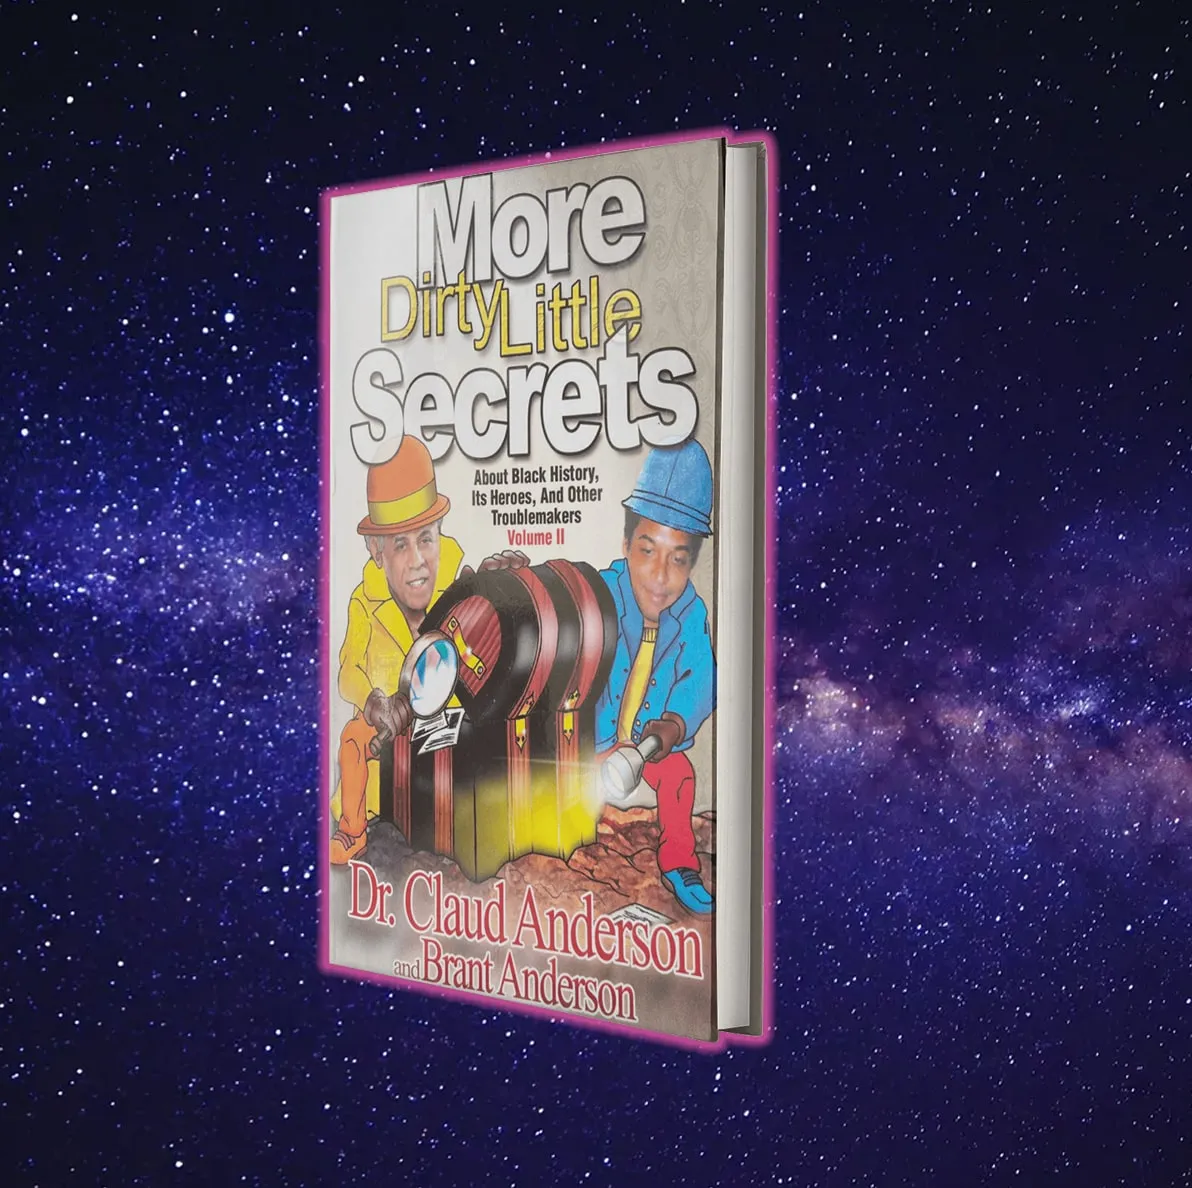 More Dirty Little Secrets About Black History, Its Heroes, & Other Troublemakers by Dr. Claud Anderson & Brant Anderson